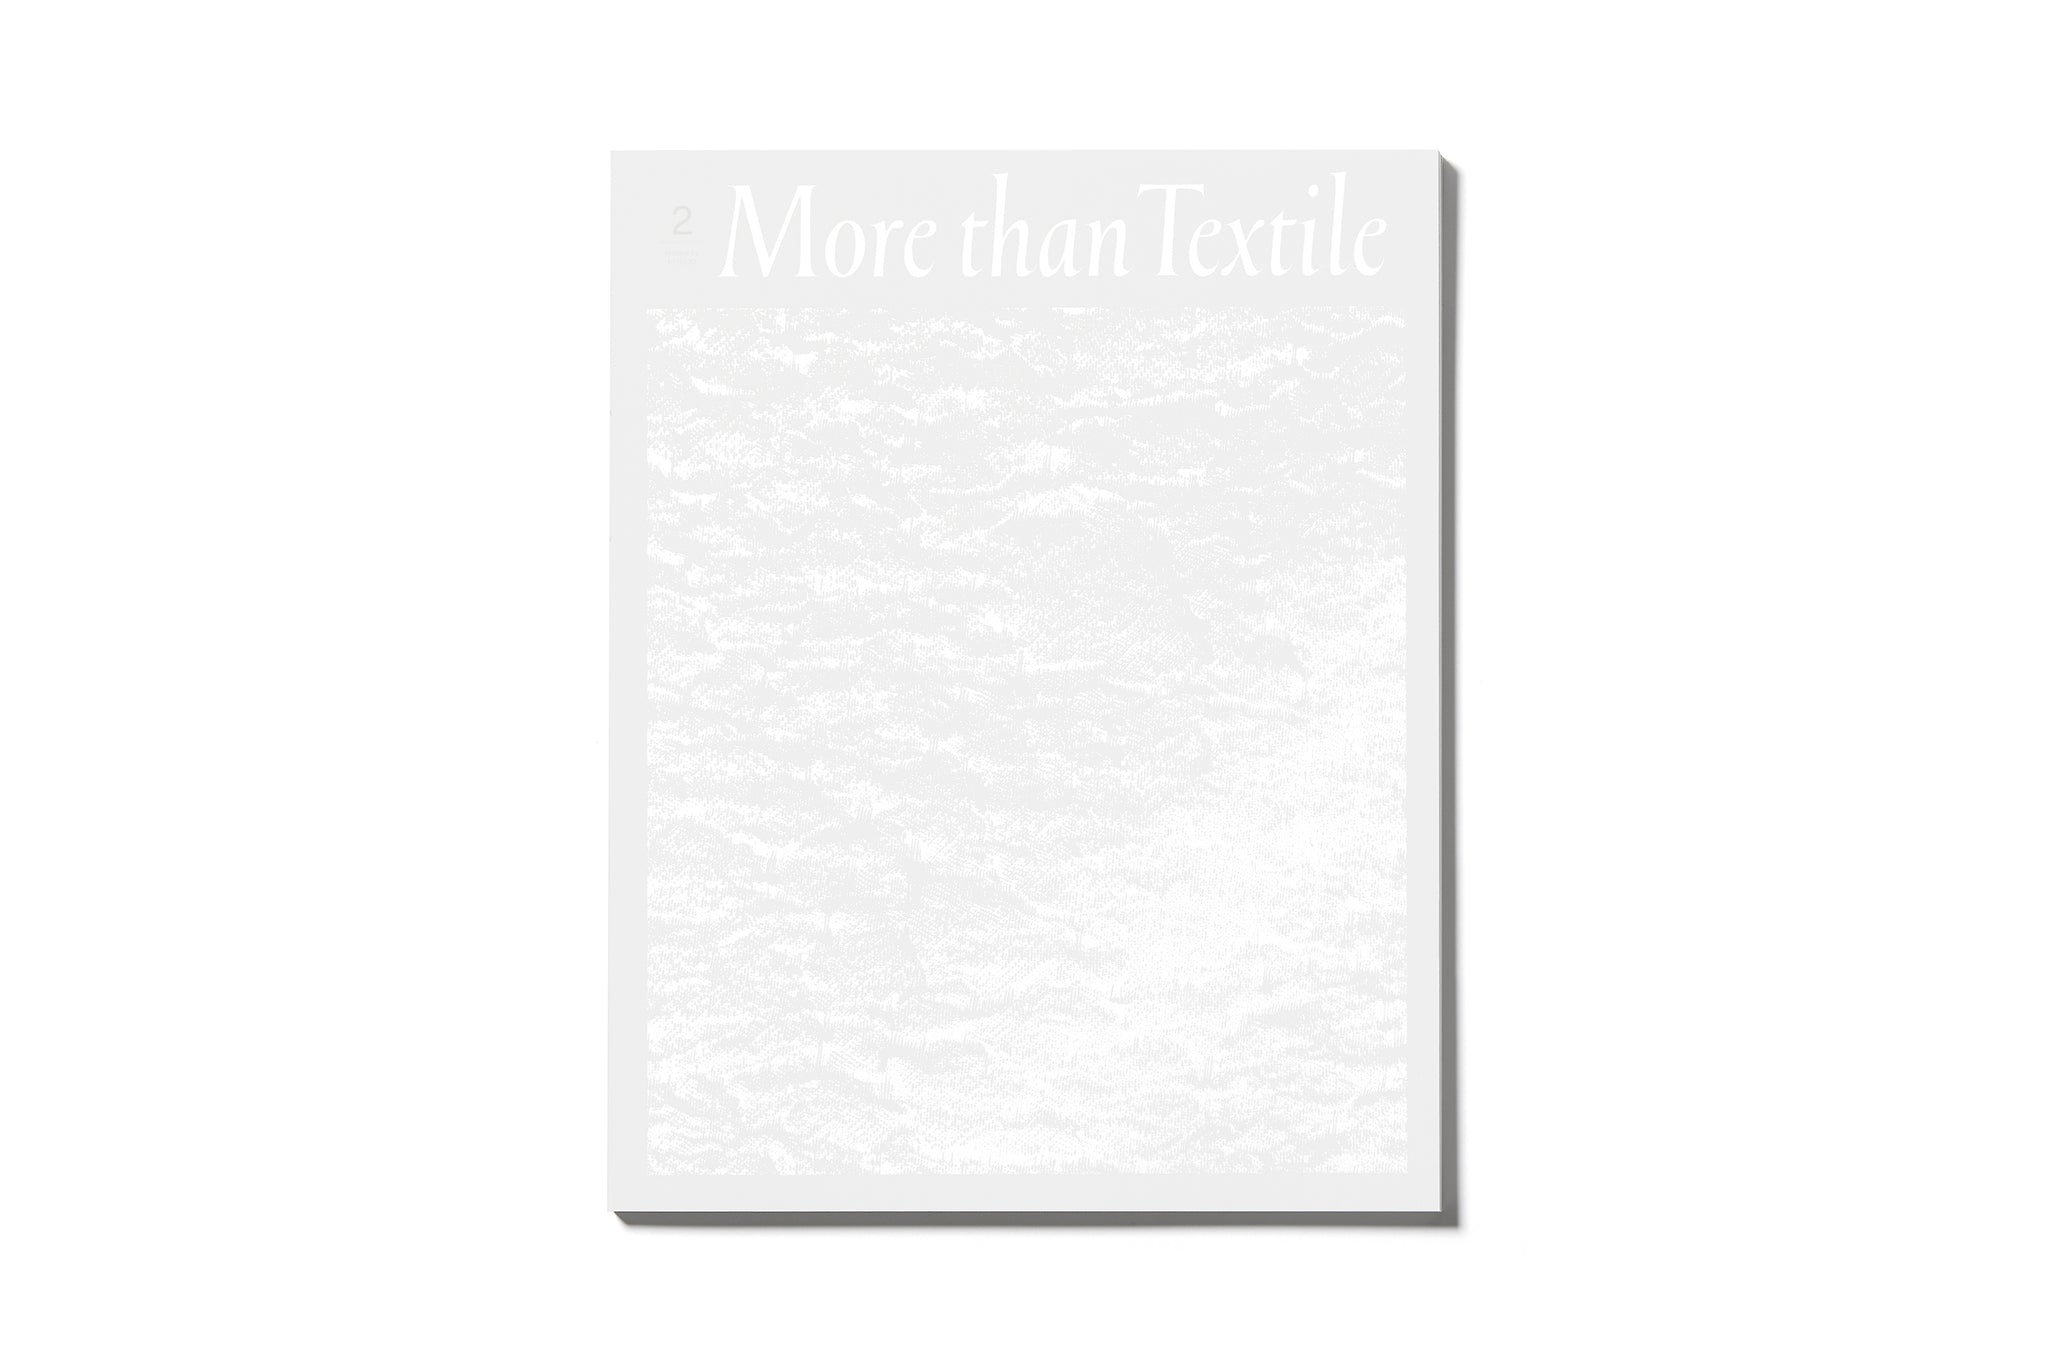 HOSOO Magazine 「More than Textile」issue 02